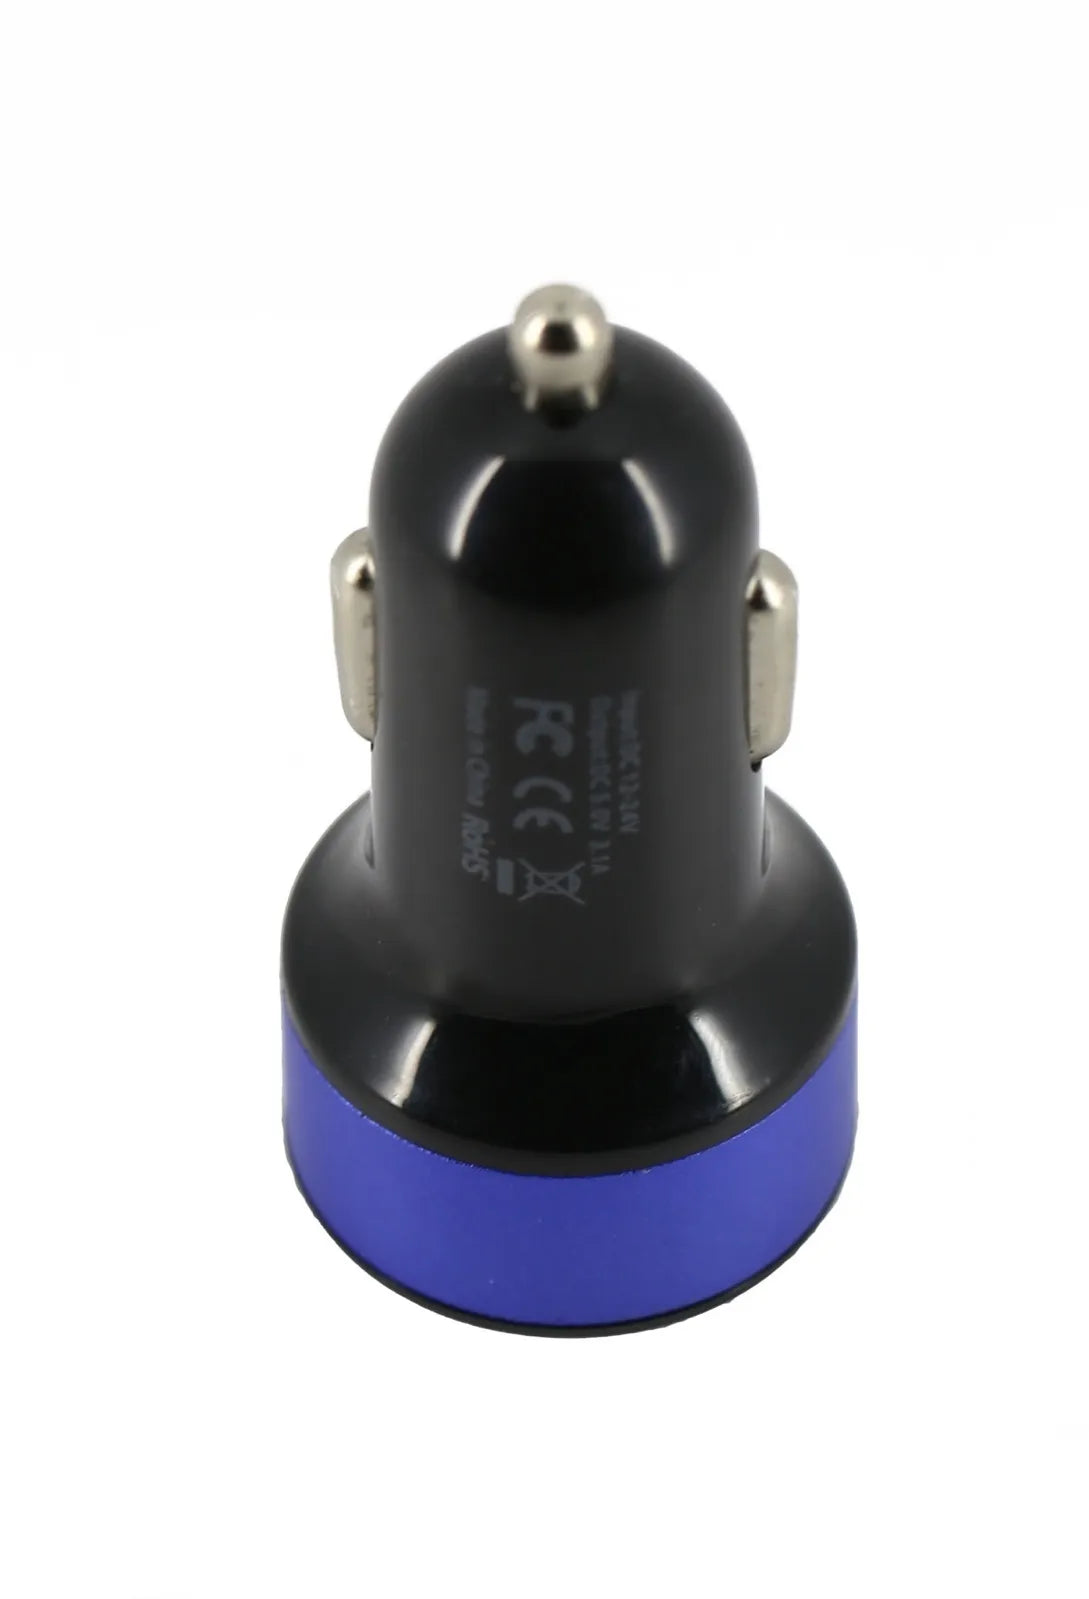 Black/Blue USB Car Charger Dual 2 Port for iPhone Samsung HTC 3.1a 2.1a travel